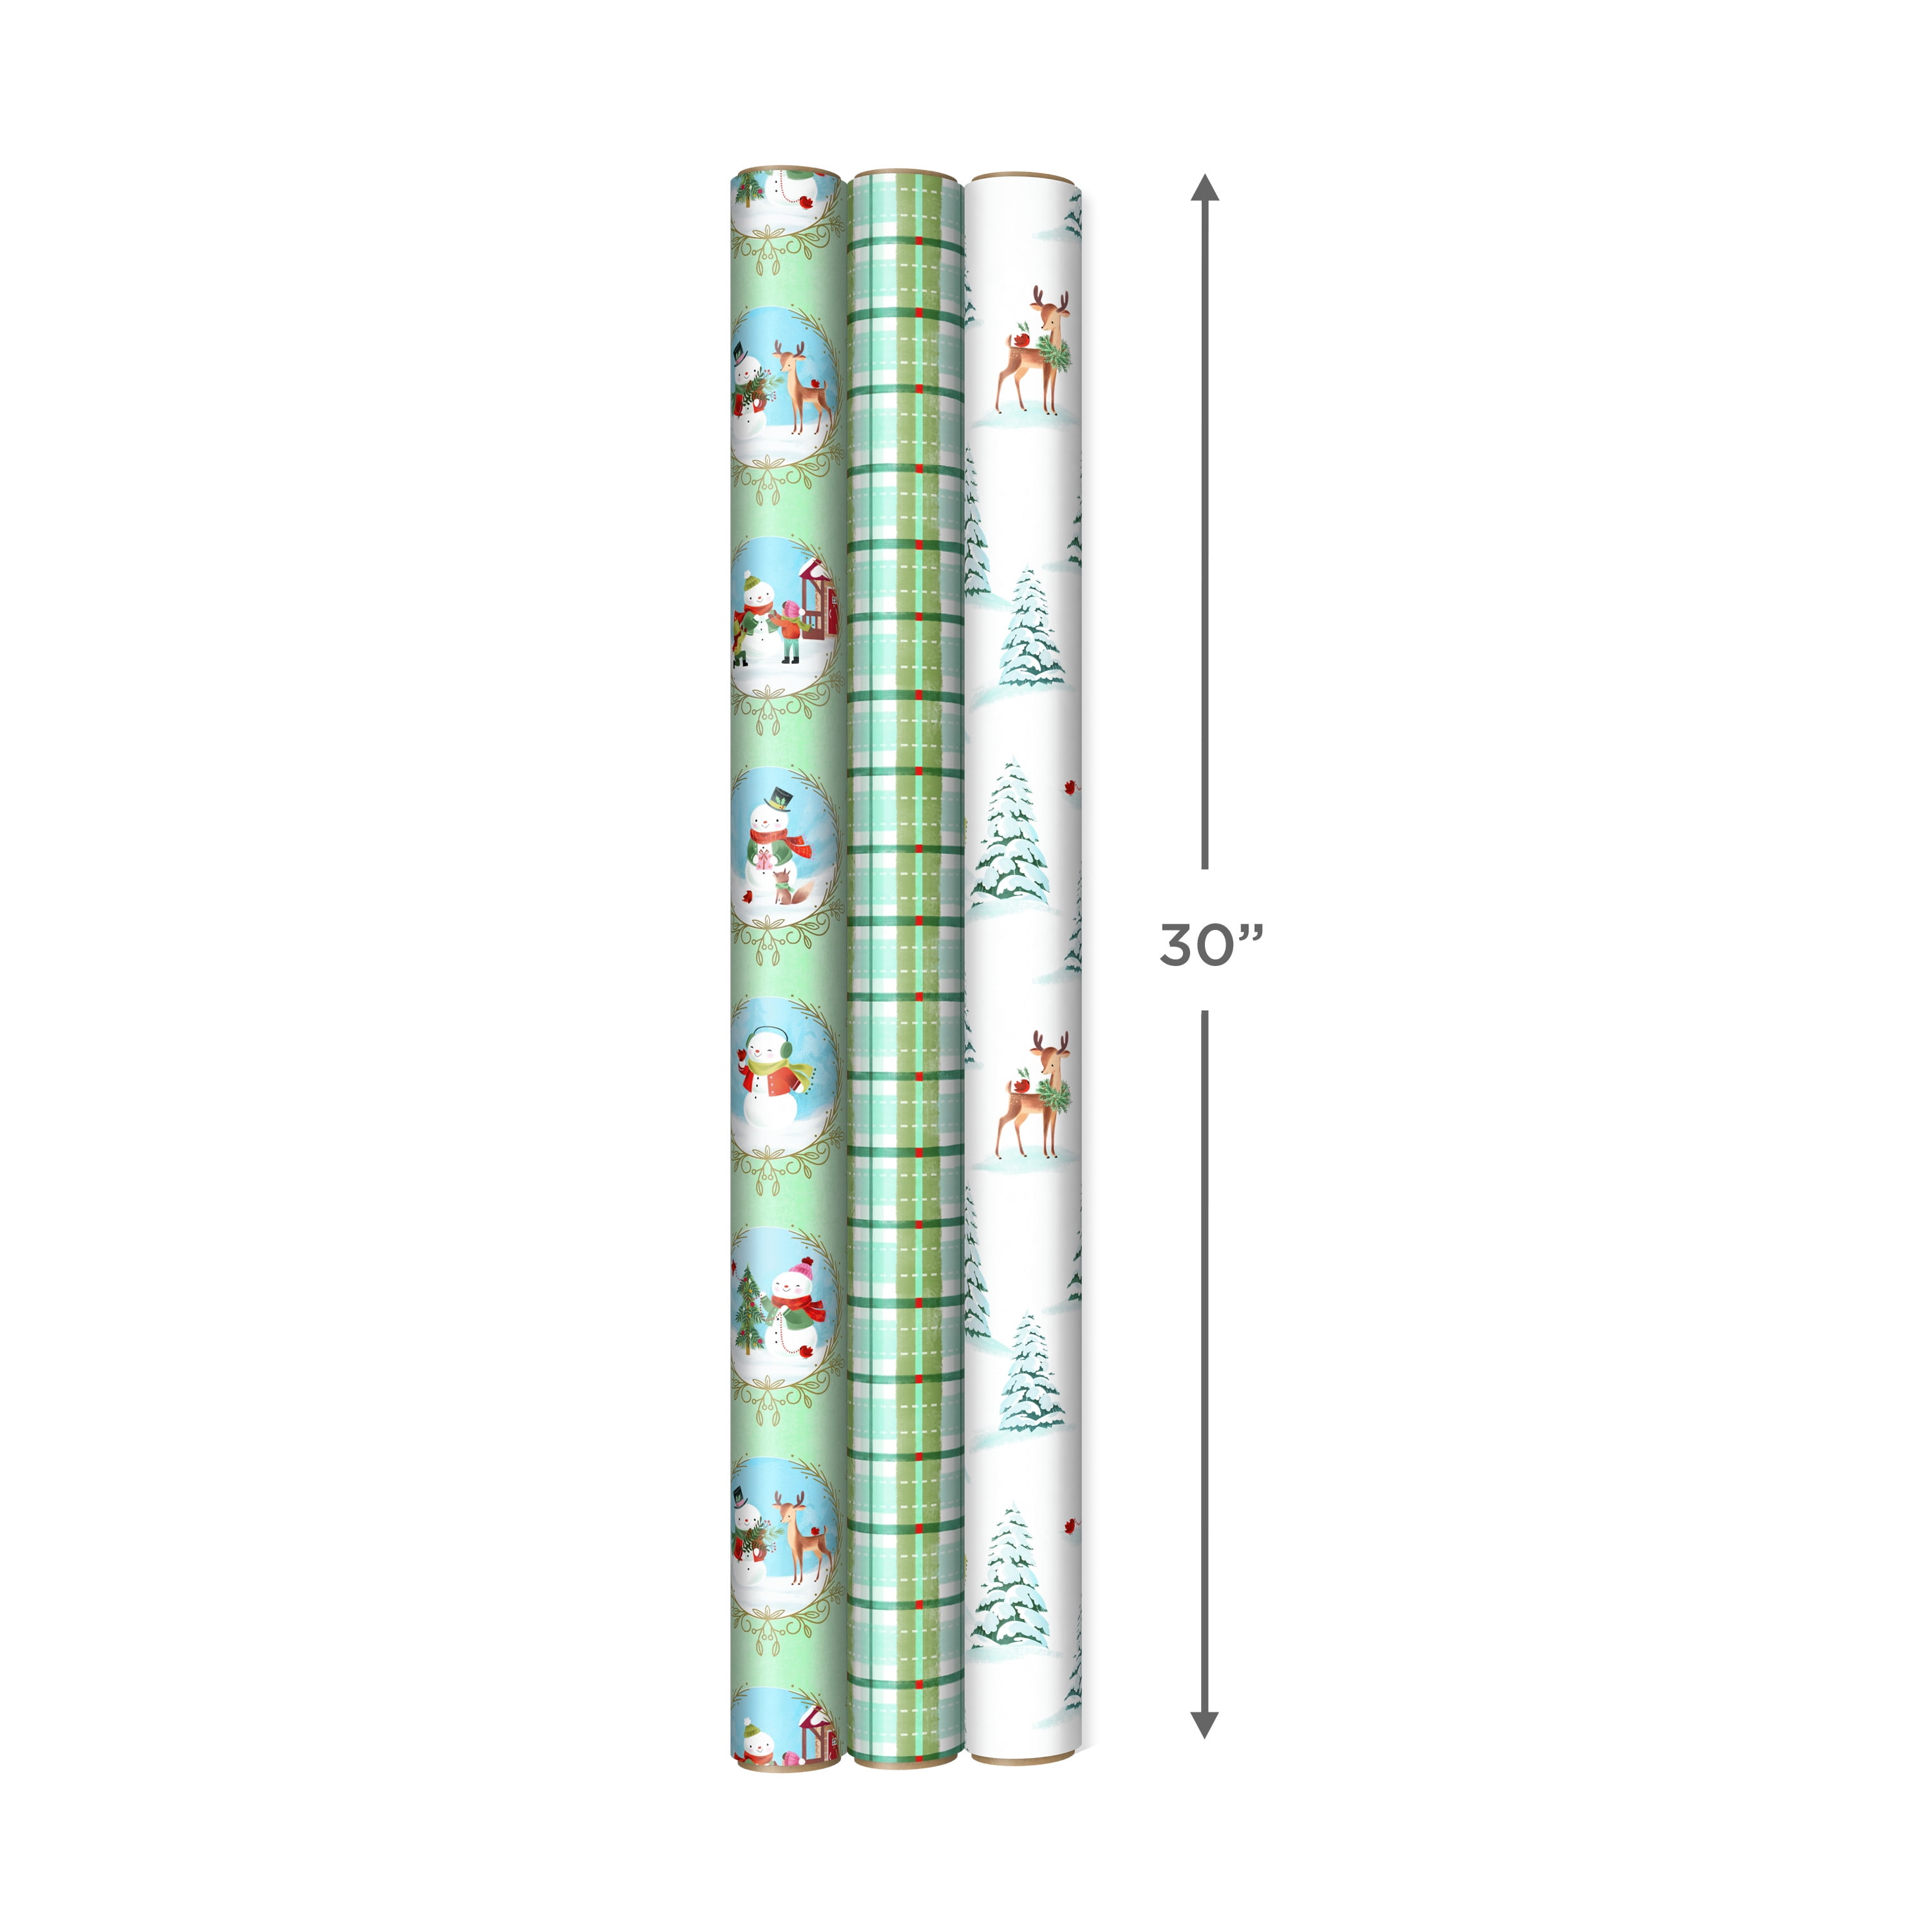 Hallmark Recyclable Neutral Christmas Wrapping Paper (4 Rolls: 100 Sq. ft. ttl) White and Sage Green Evergreen Pinecones, Rustic Snowmen, Plaid